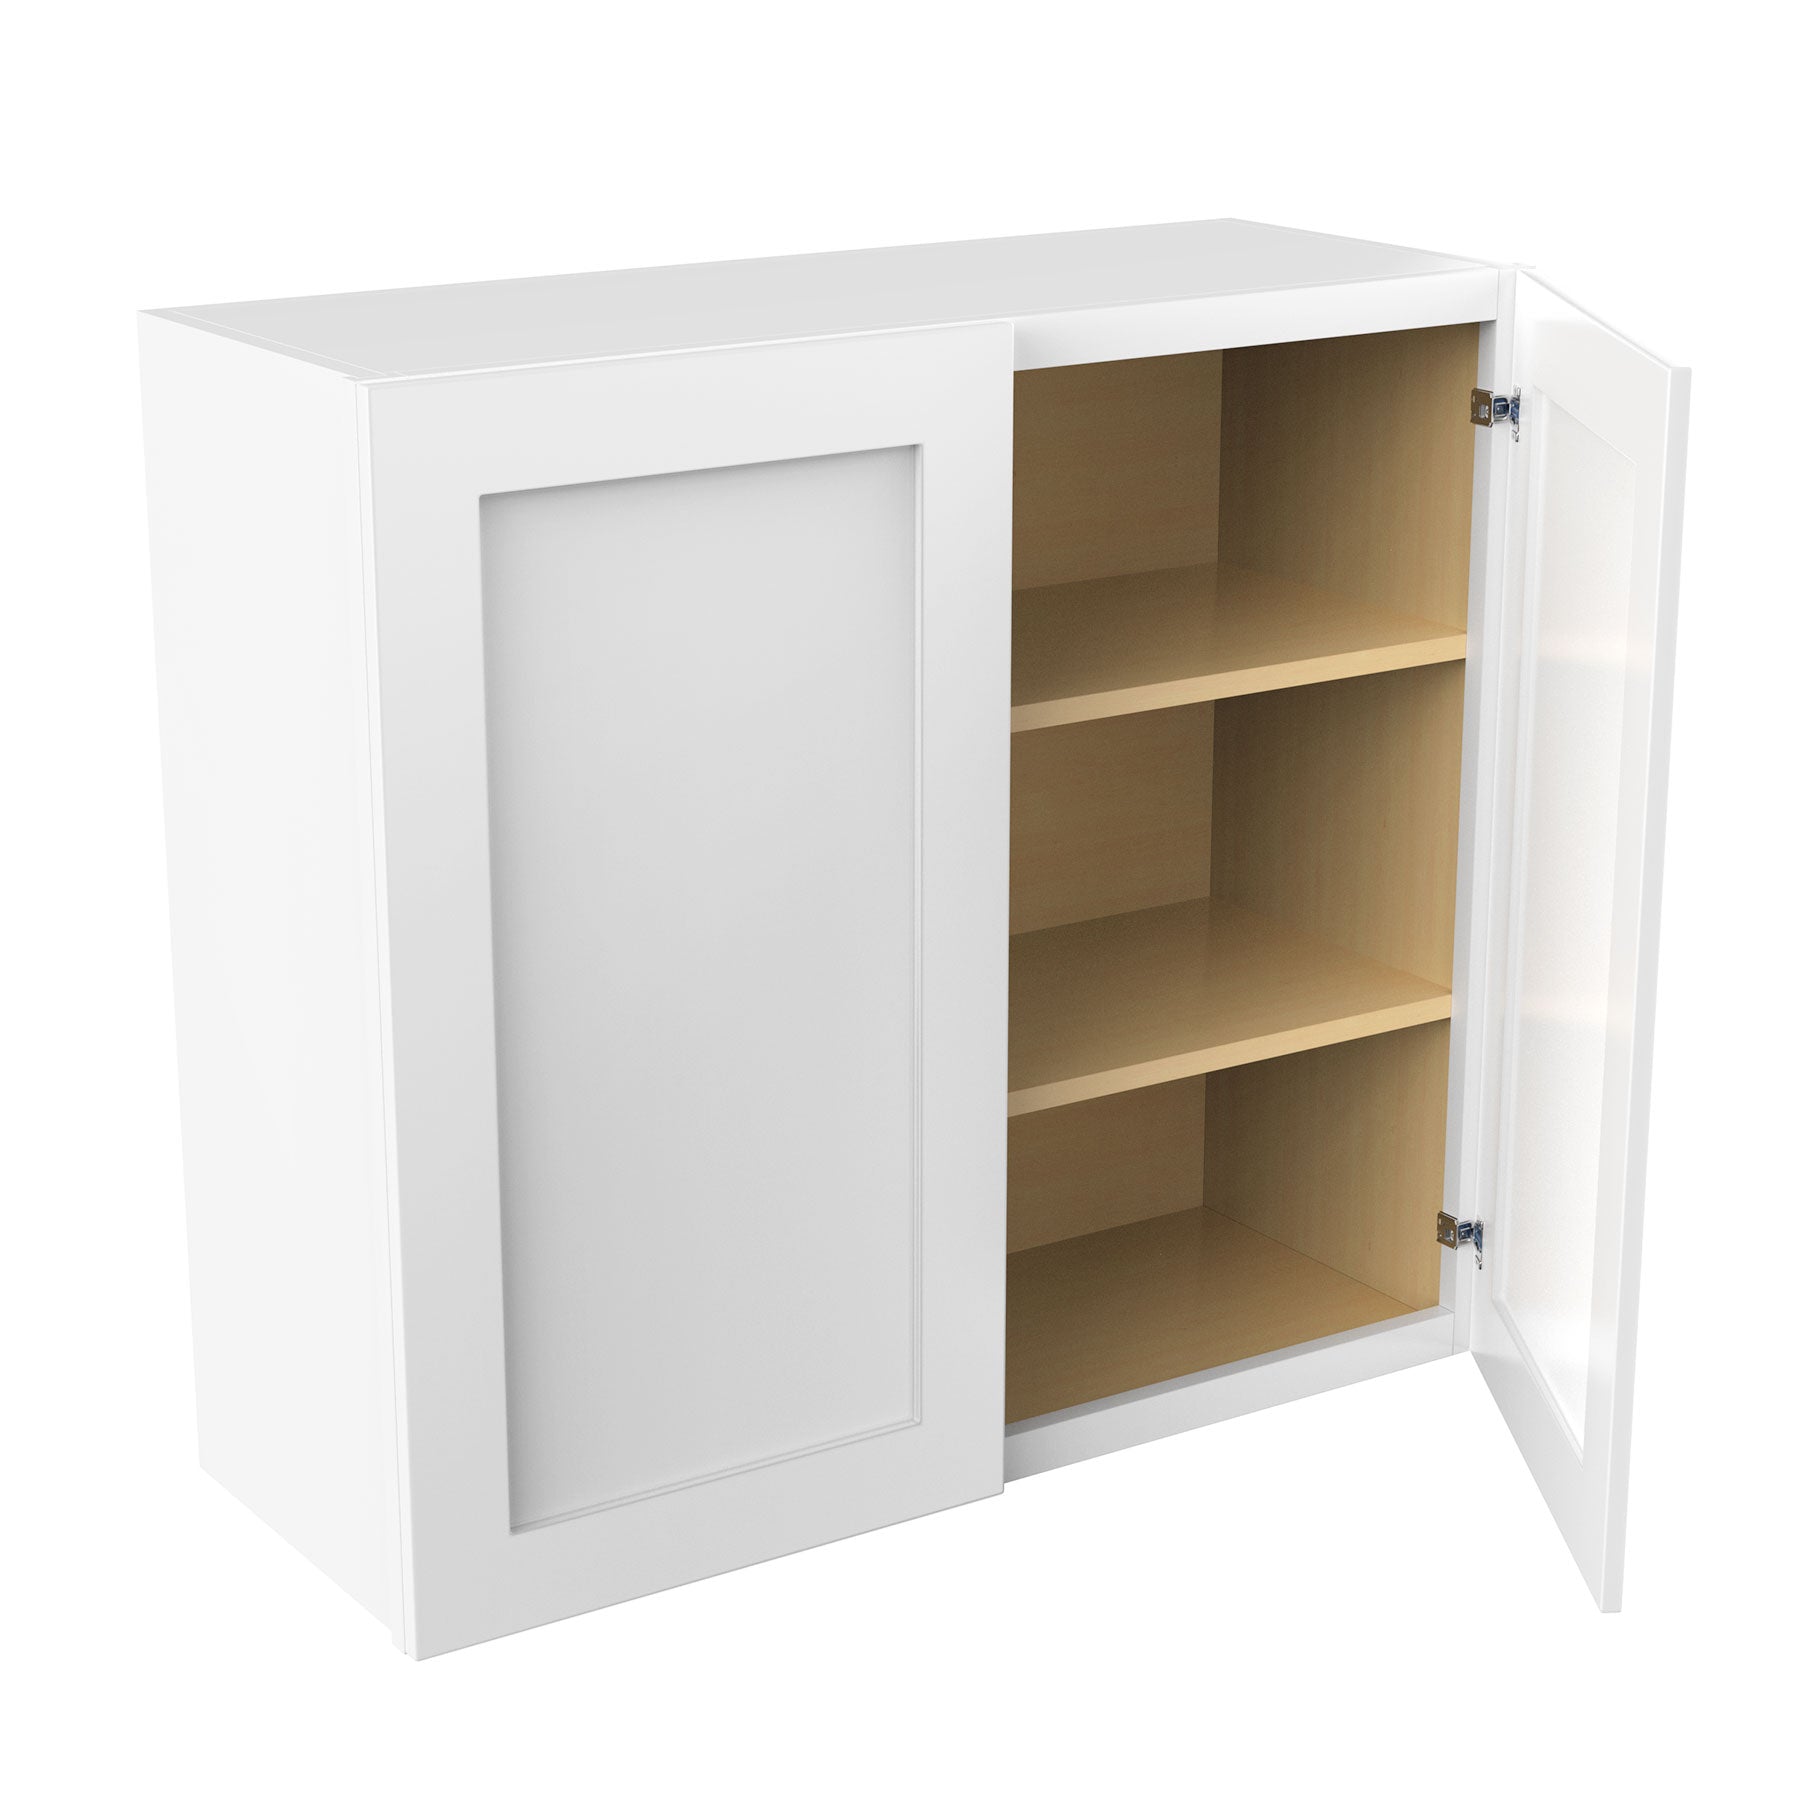 RTA - Elegant White - 30" High Double Door Wall Cabinet | 33"W x 30"H x 12"D